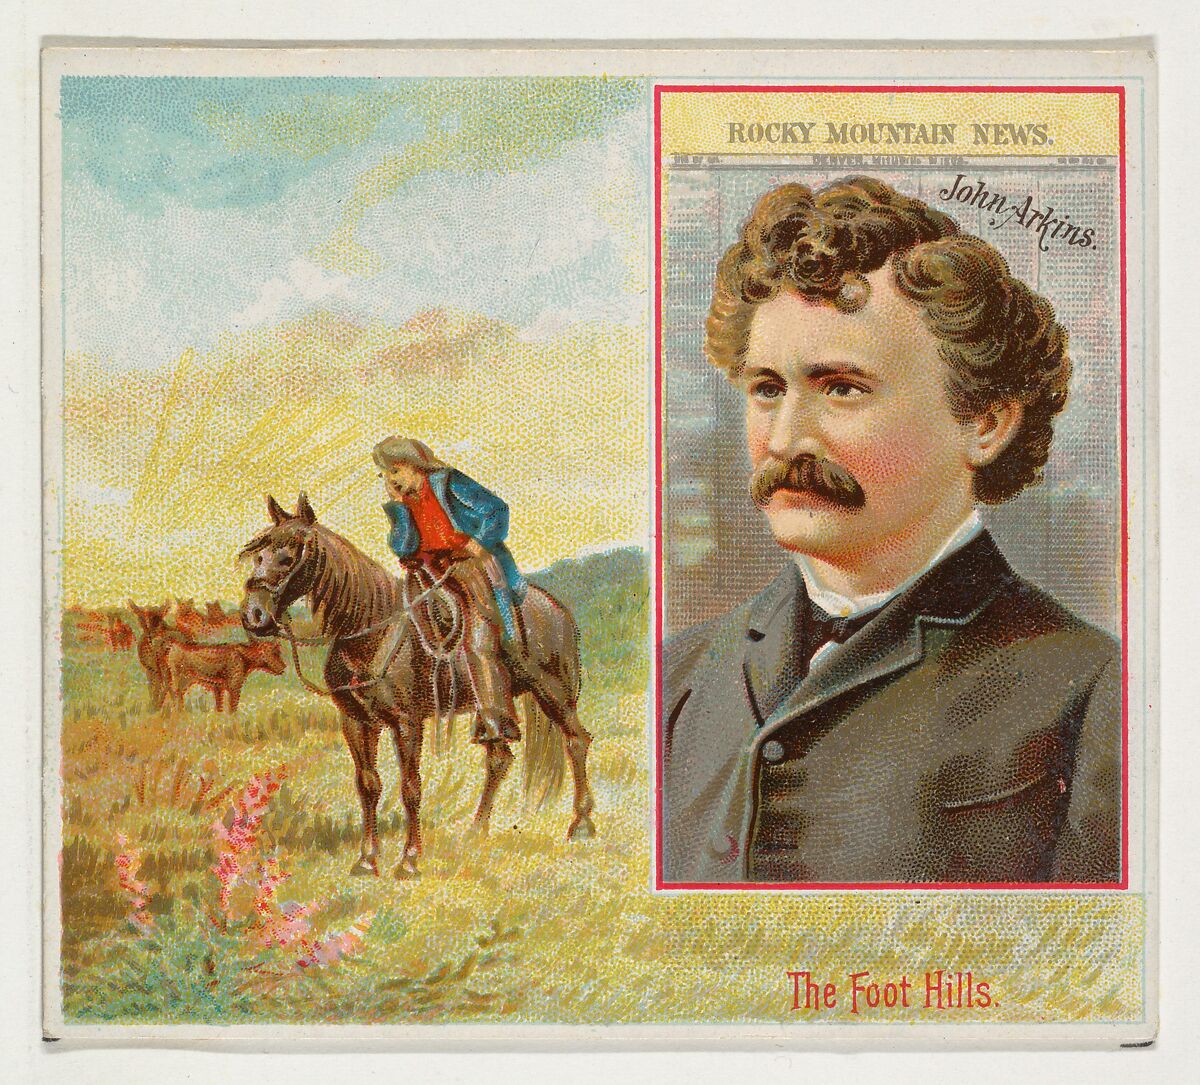 John Arkins, Denver Rocky Mountain News, from the American Editors series (N35) for Allen & Ginter Cigarettes, Issued by Allen &amp; Ginter (American, Richmond, Virginia), Commercial color lithograph 